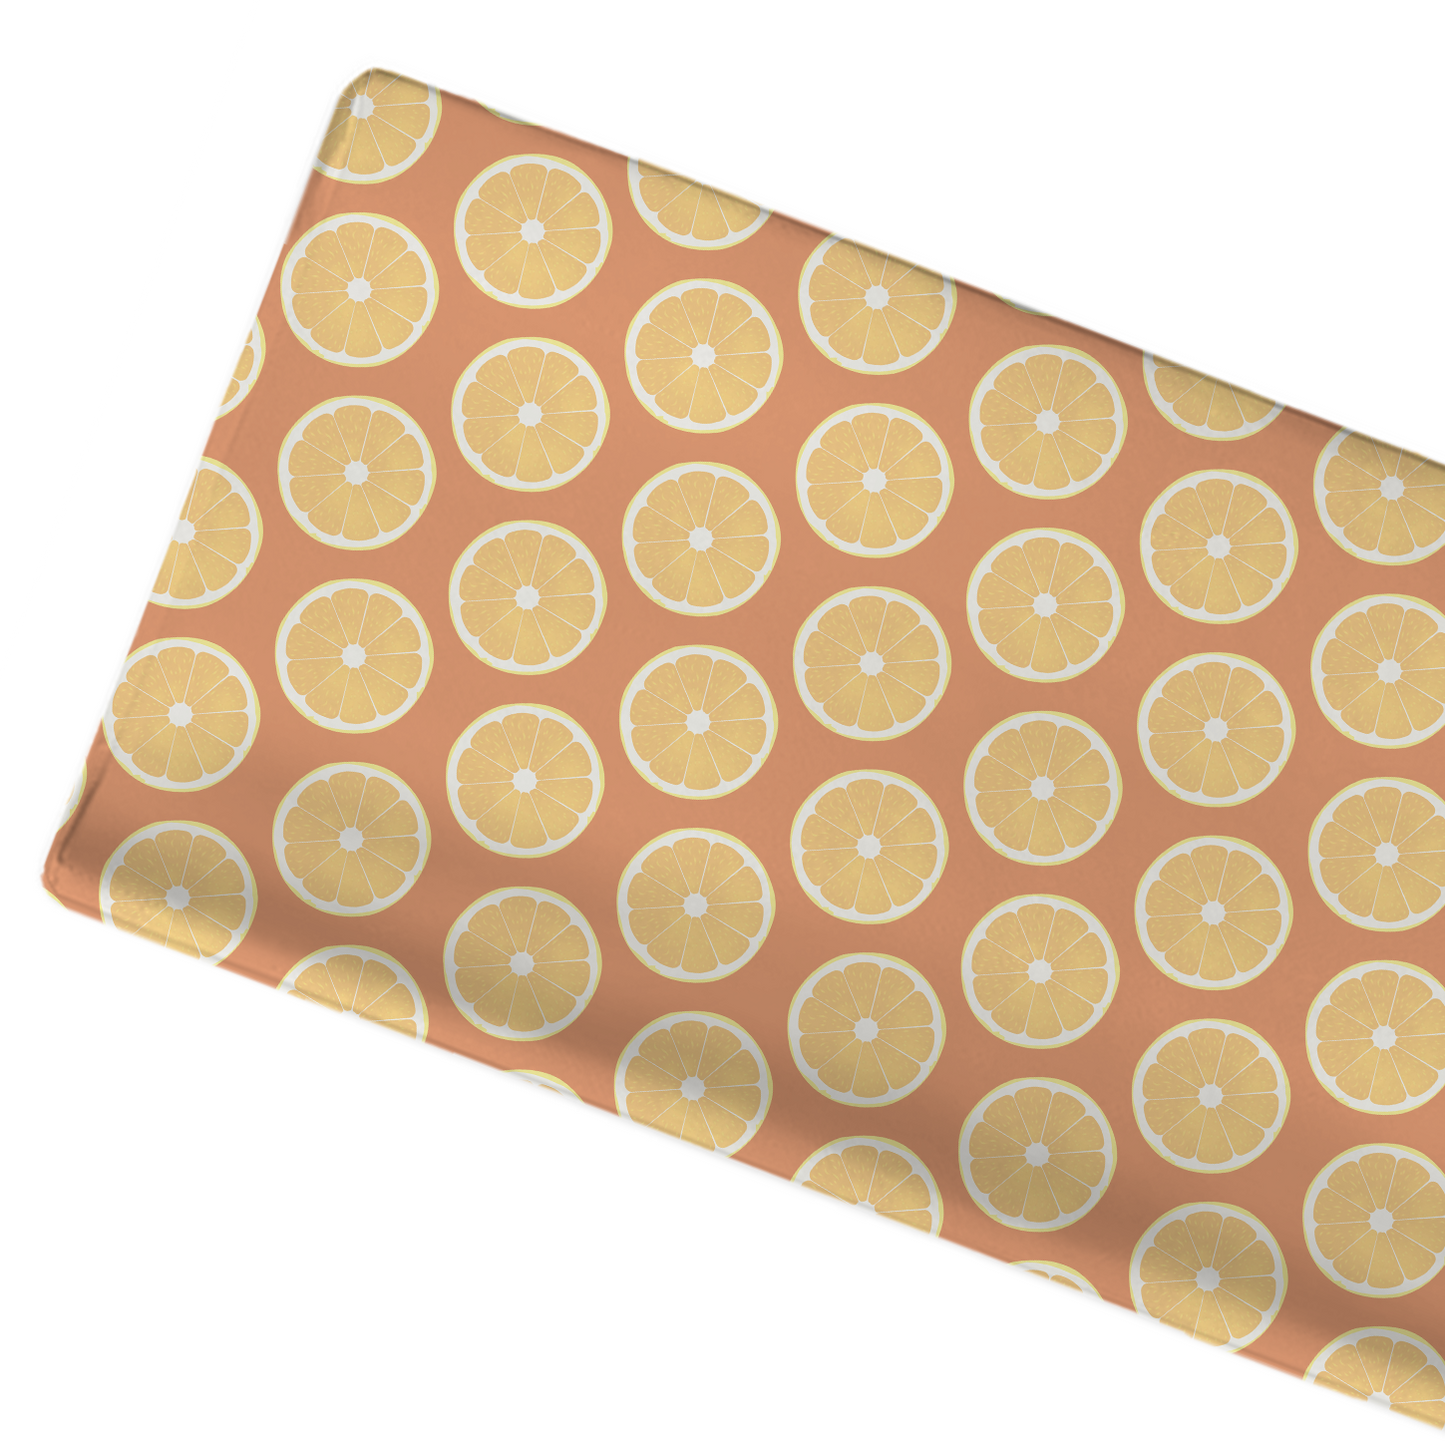 Orange Slices Changing Pad Cover